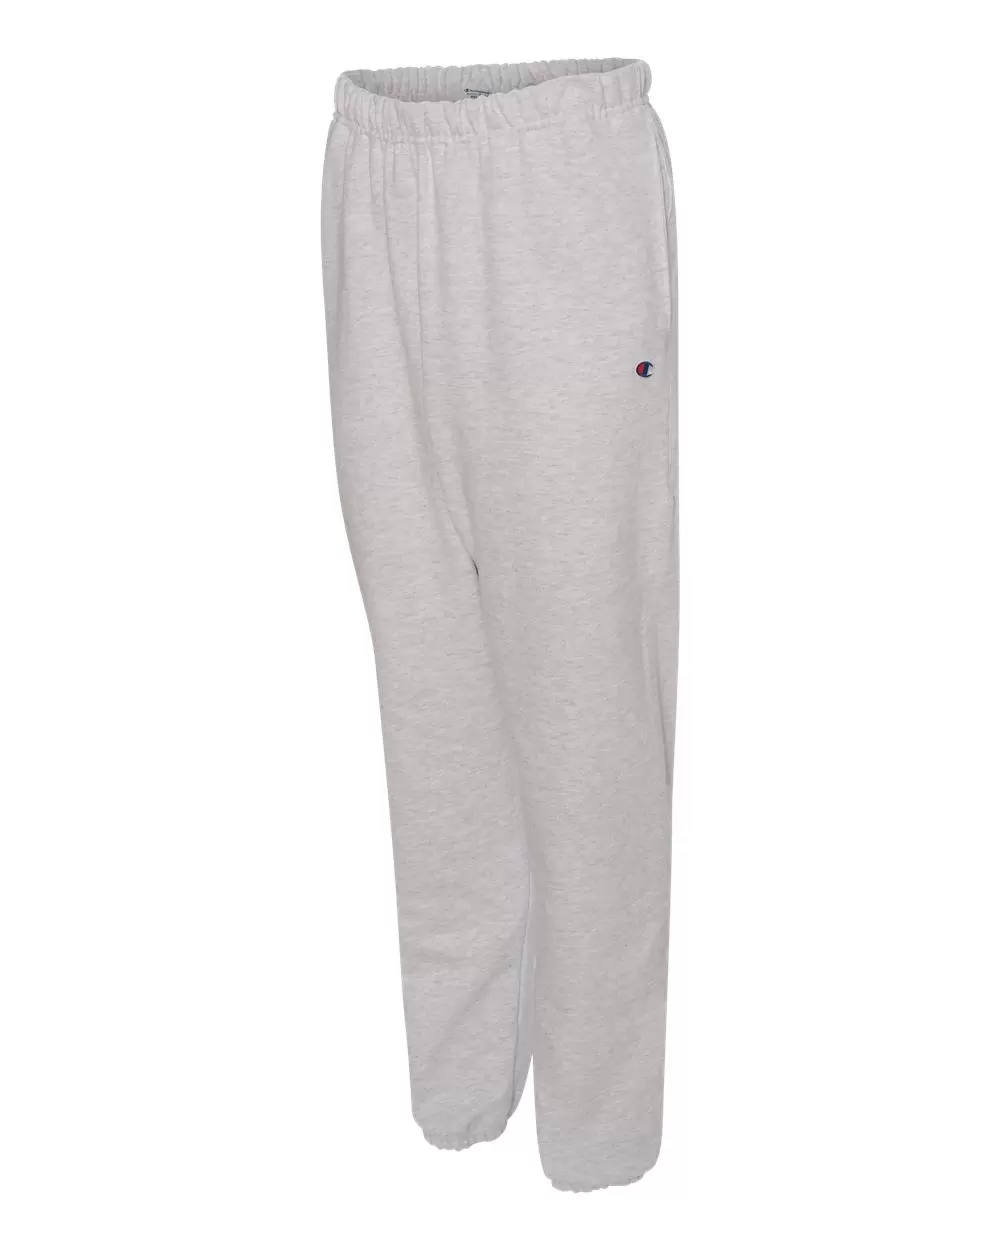 Champion RW10 Reverse Weave Sweatpants with Pockets - From $35.25